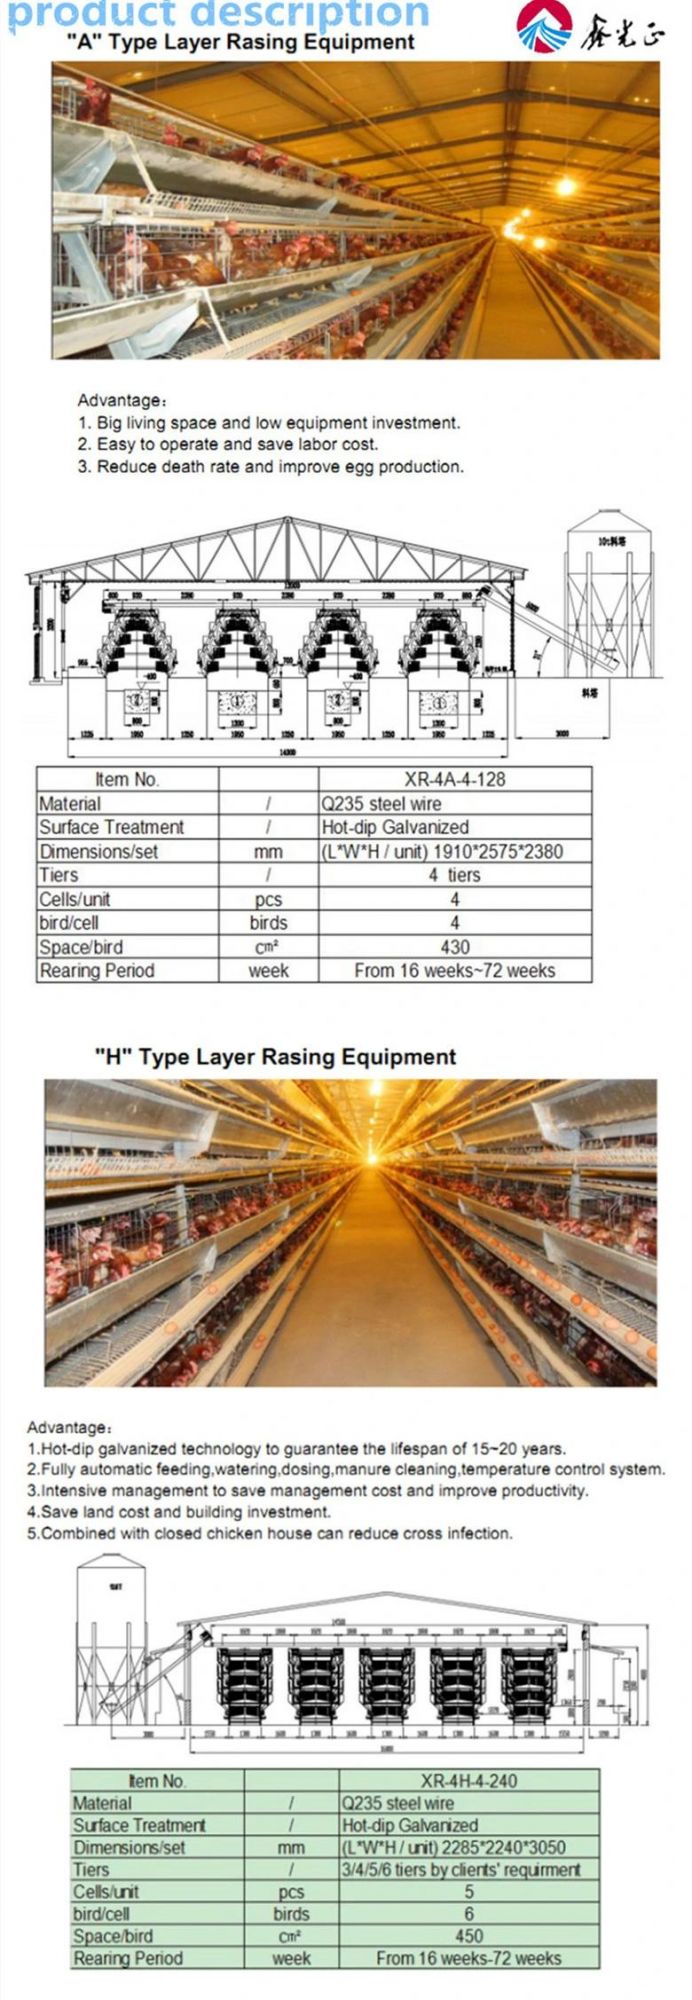 Best Price Complete Automatic Poultry Farm Equipment with Ce Certificate